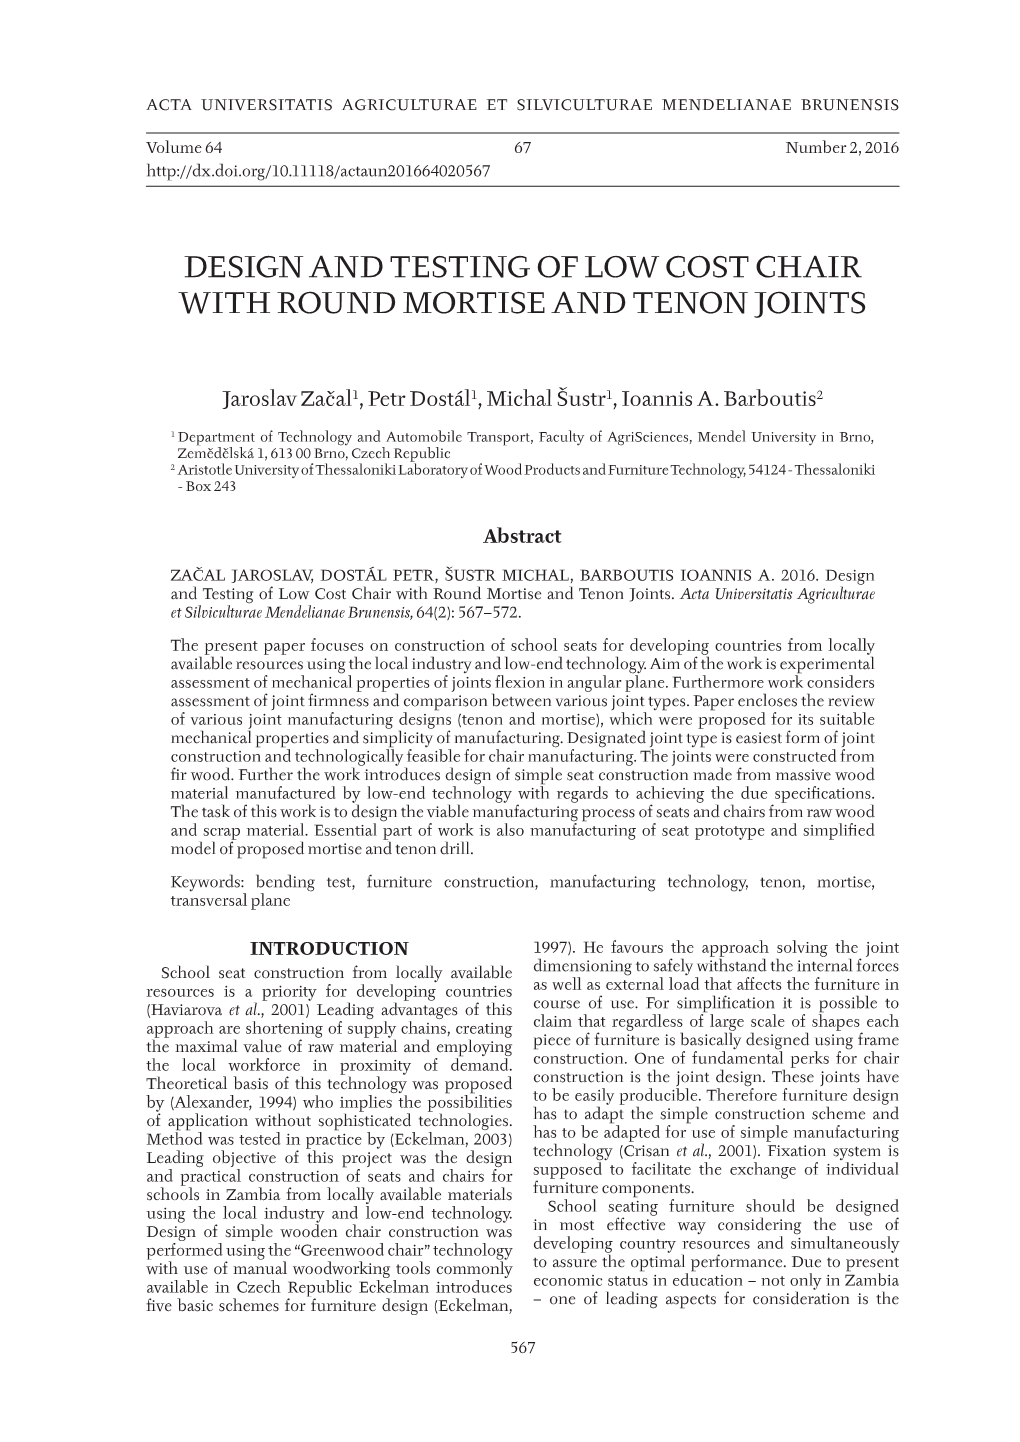 Design and Testing of Low Cost Chair with Round Mortise and Tenon Joints